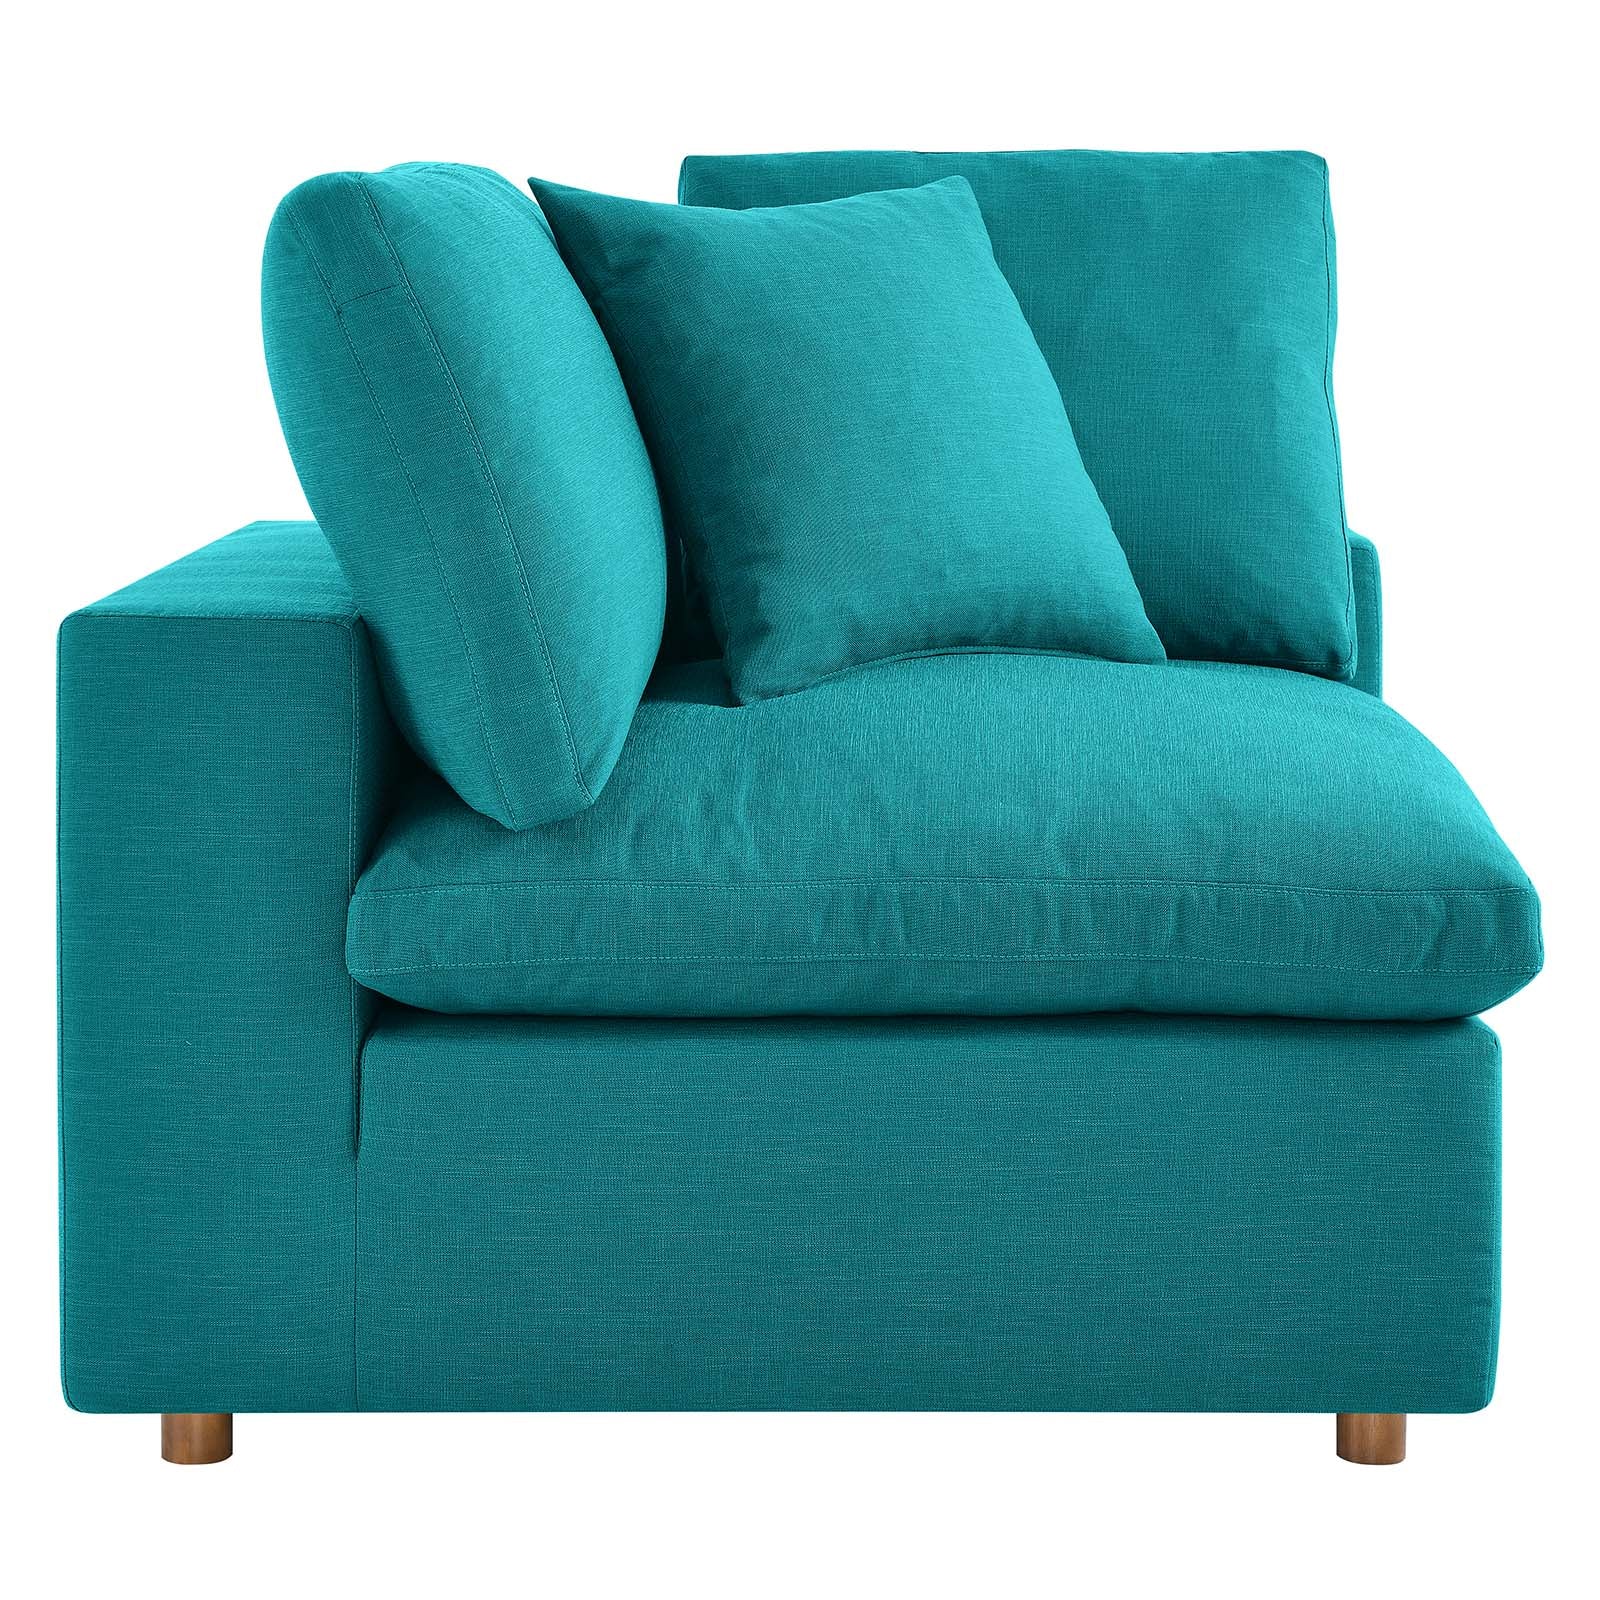 Modway Sectional Sofas - Commix Down Filled Overstuffed 6-Piece Sectional Sofa Teal